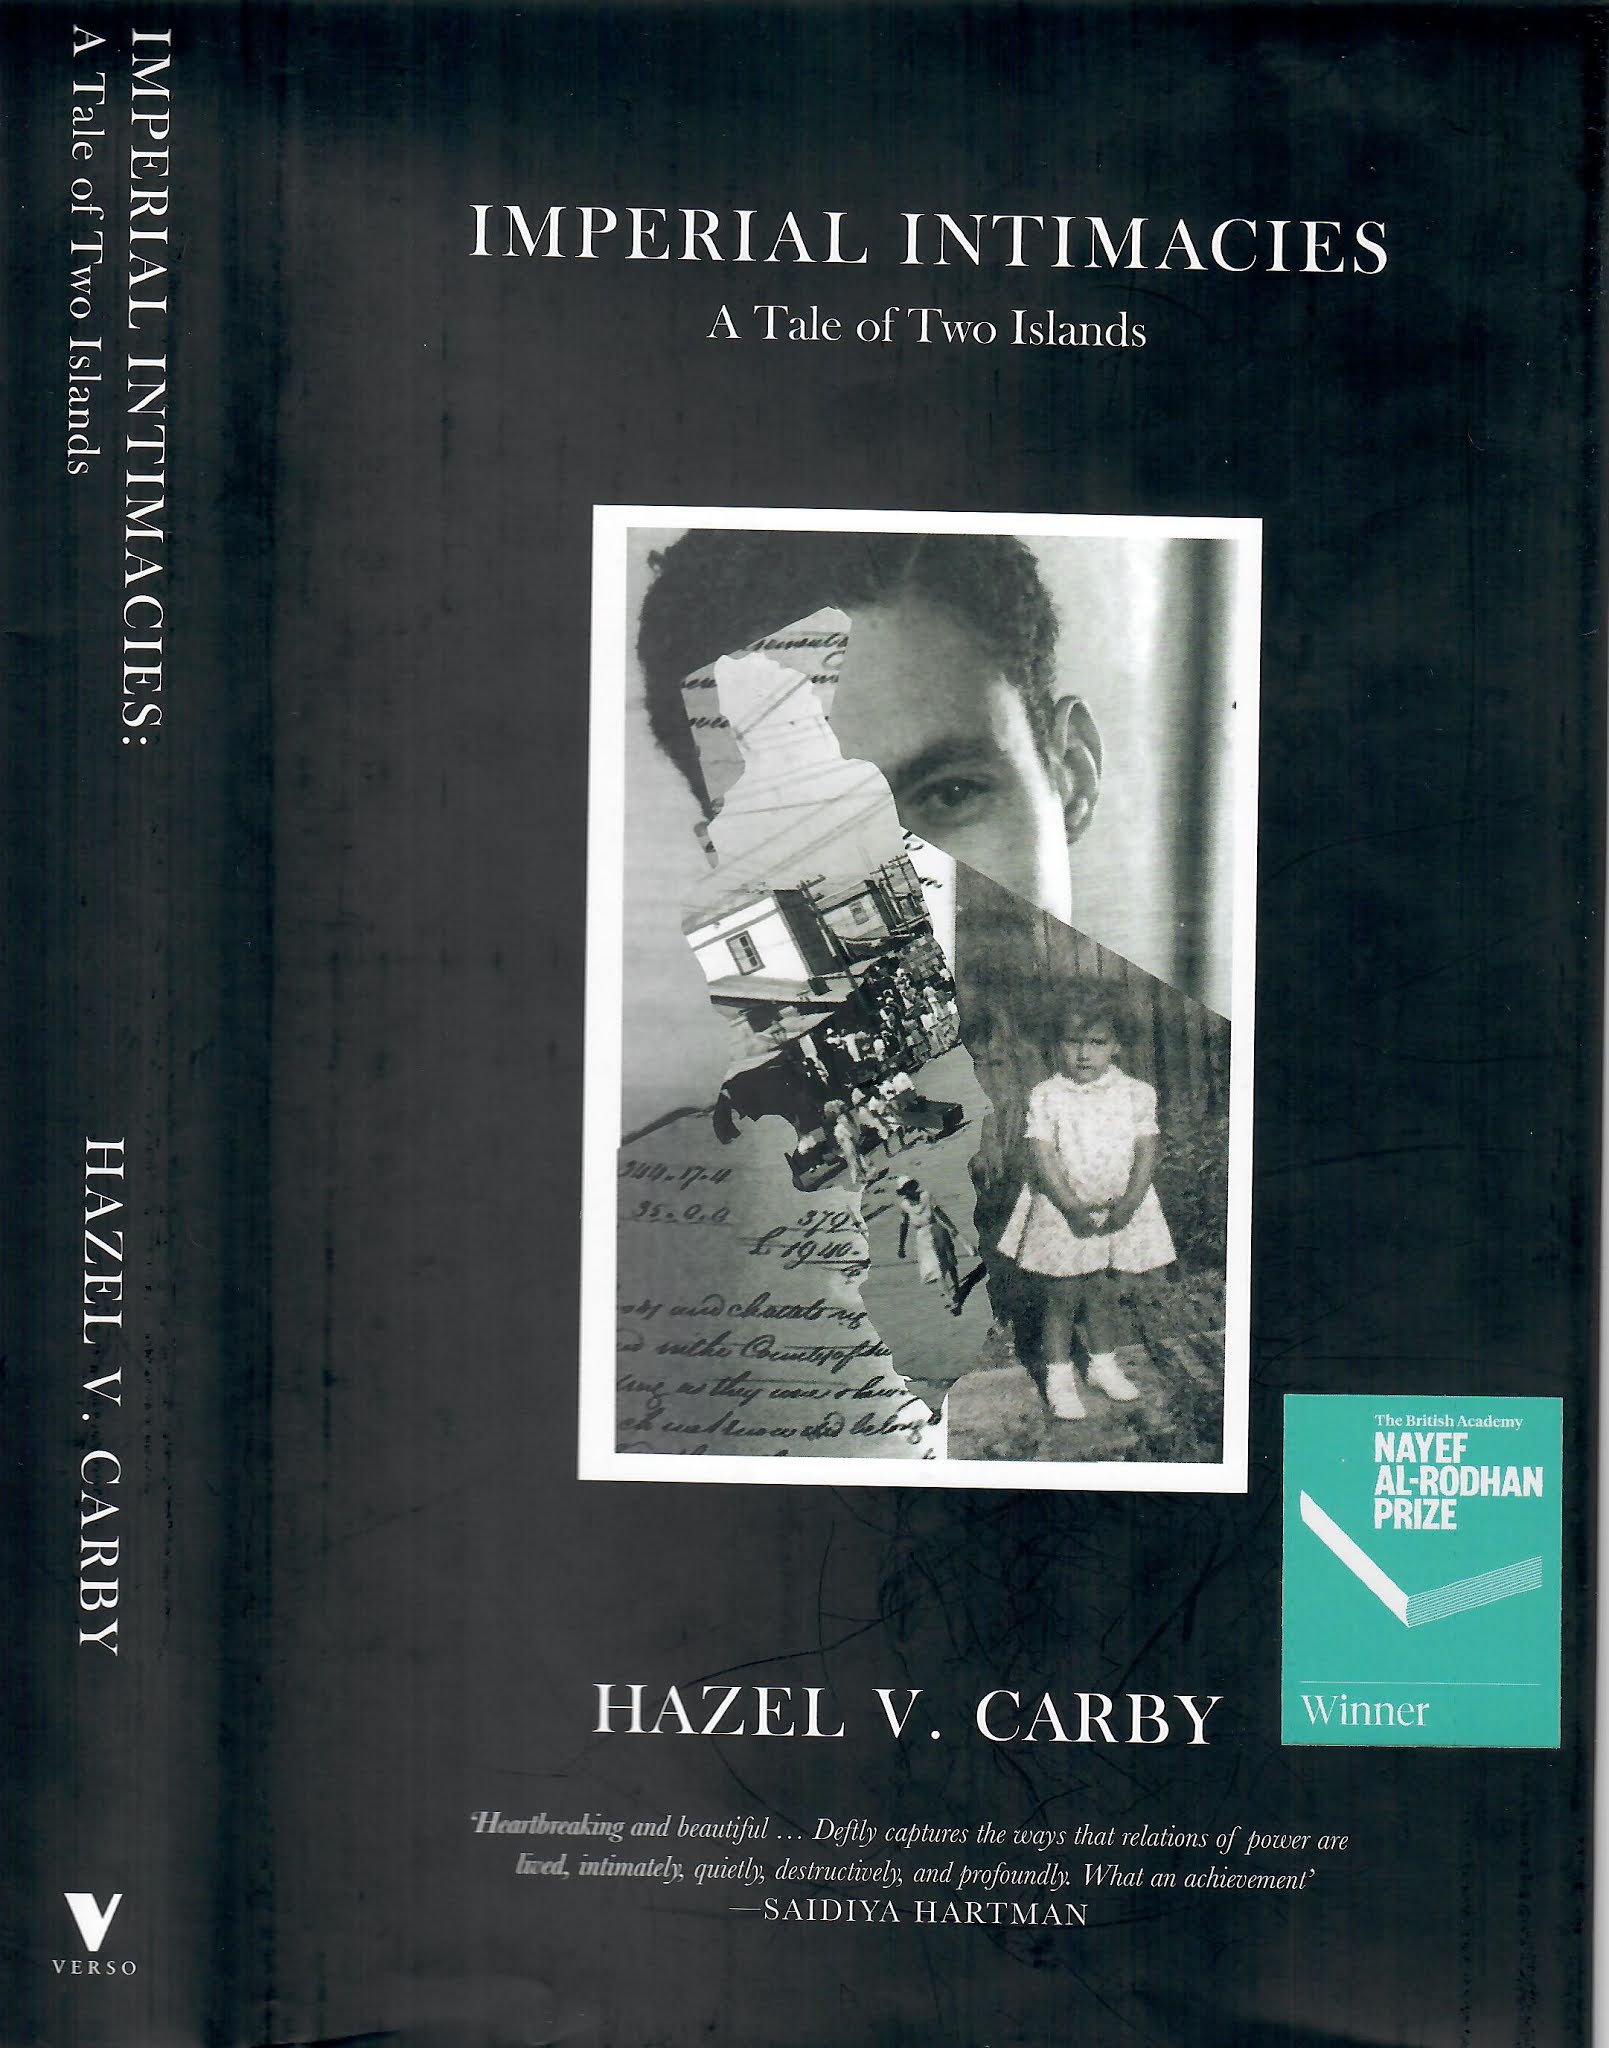 book review of intimacies